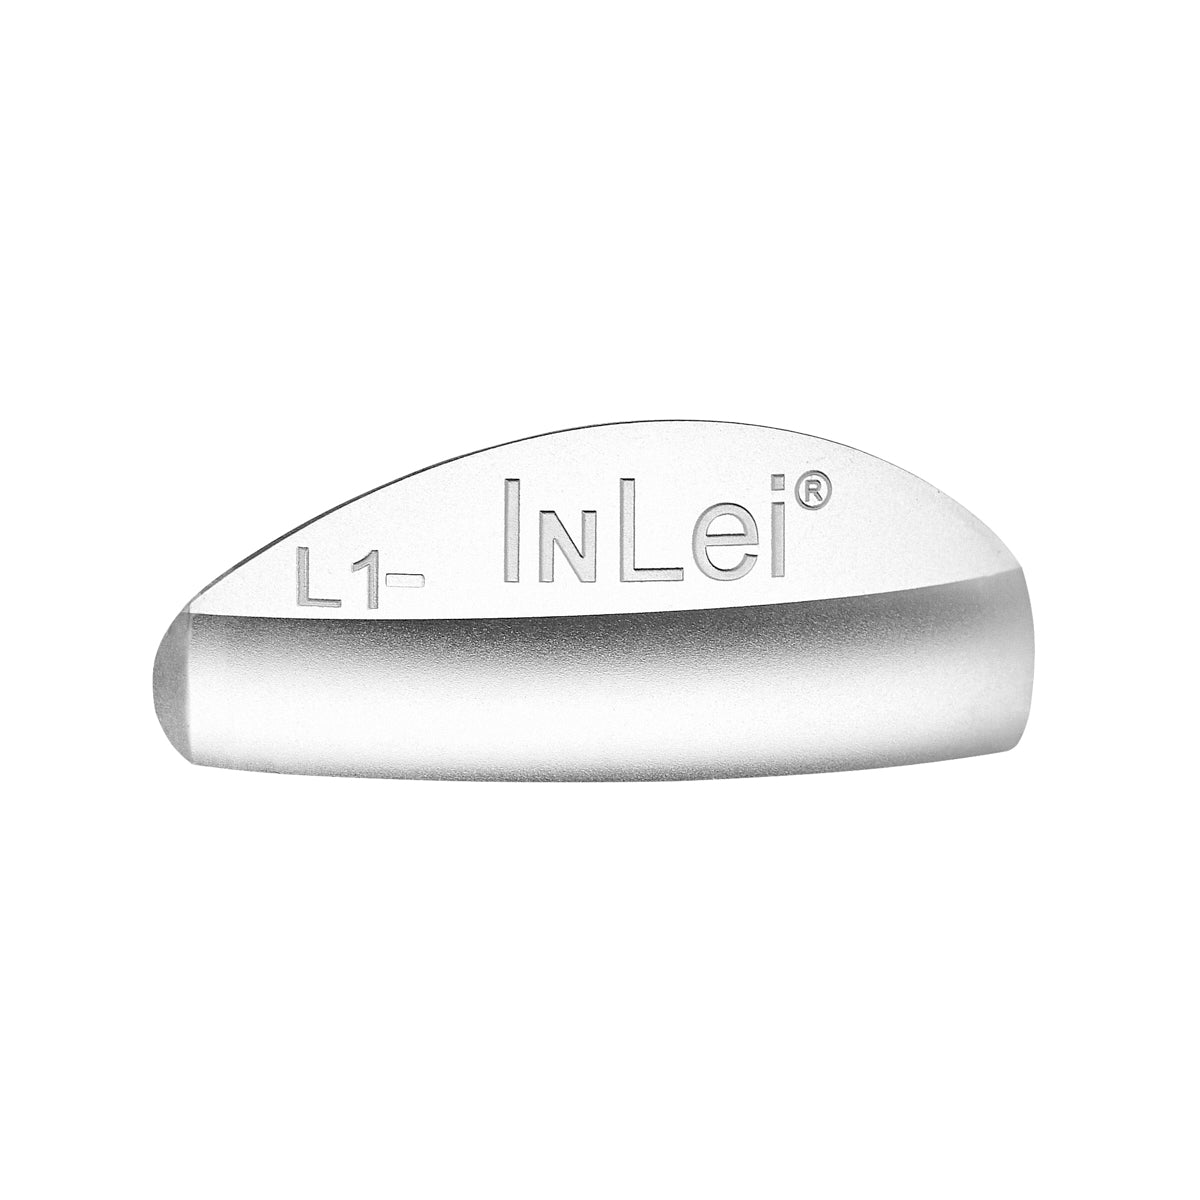 InLei® “ONE” - Silicone Shields L1